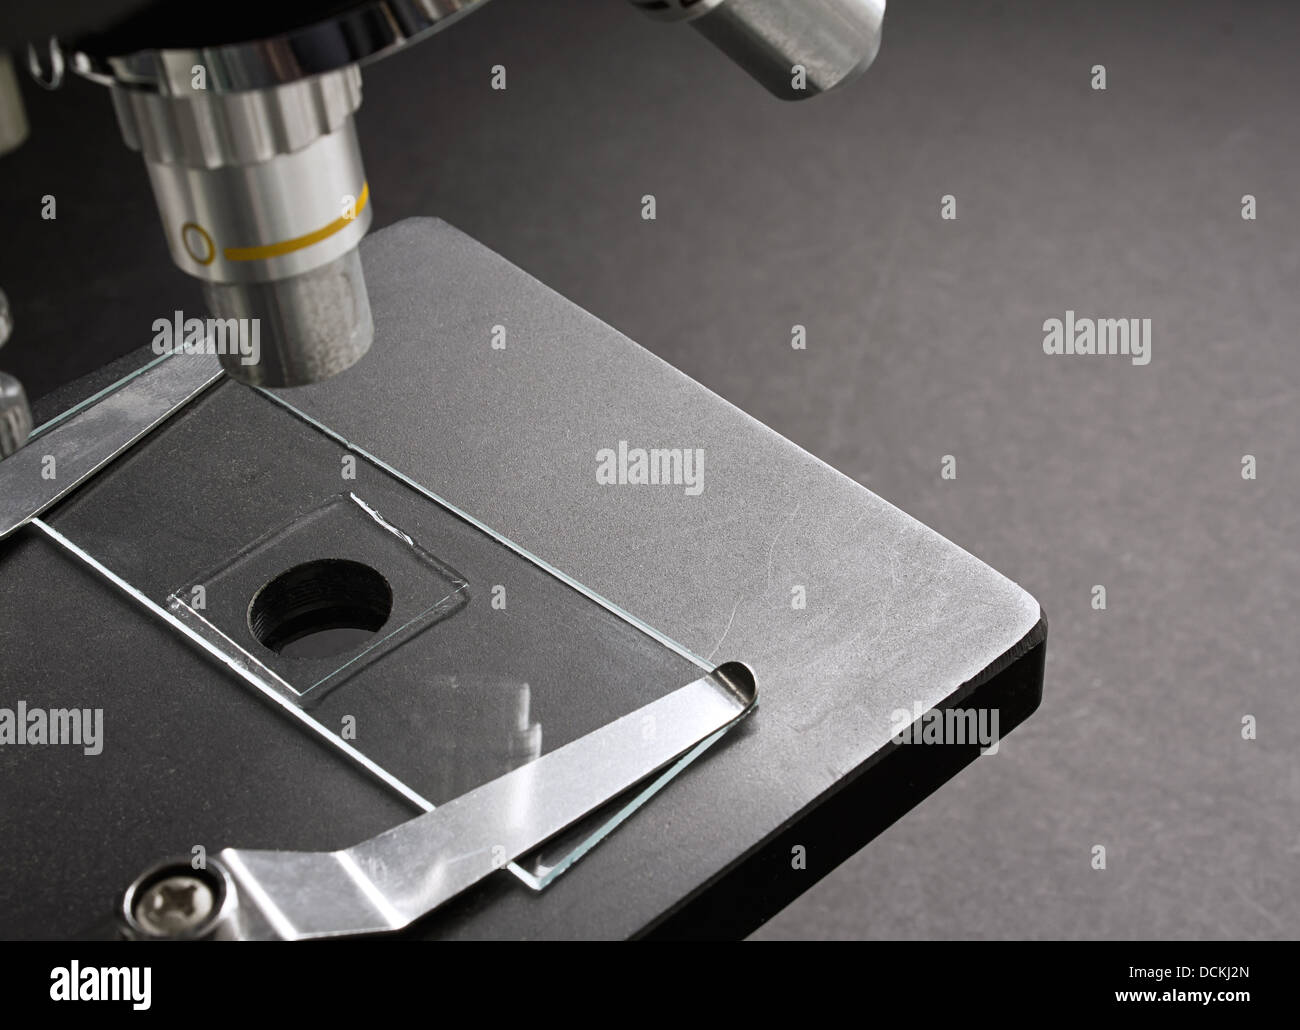 microscope with mounted glass slide on for microscopic inspection of cells Stock Photo